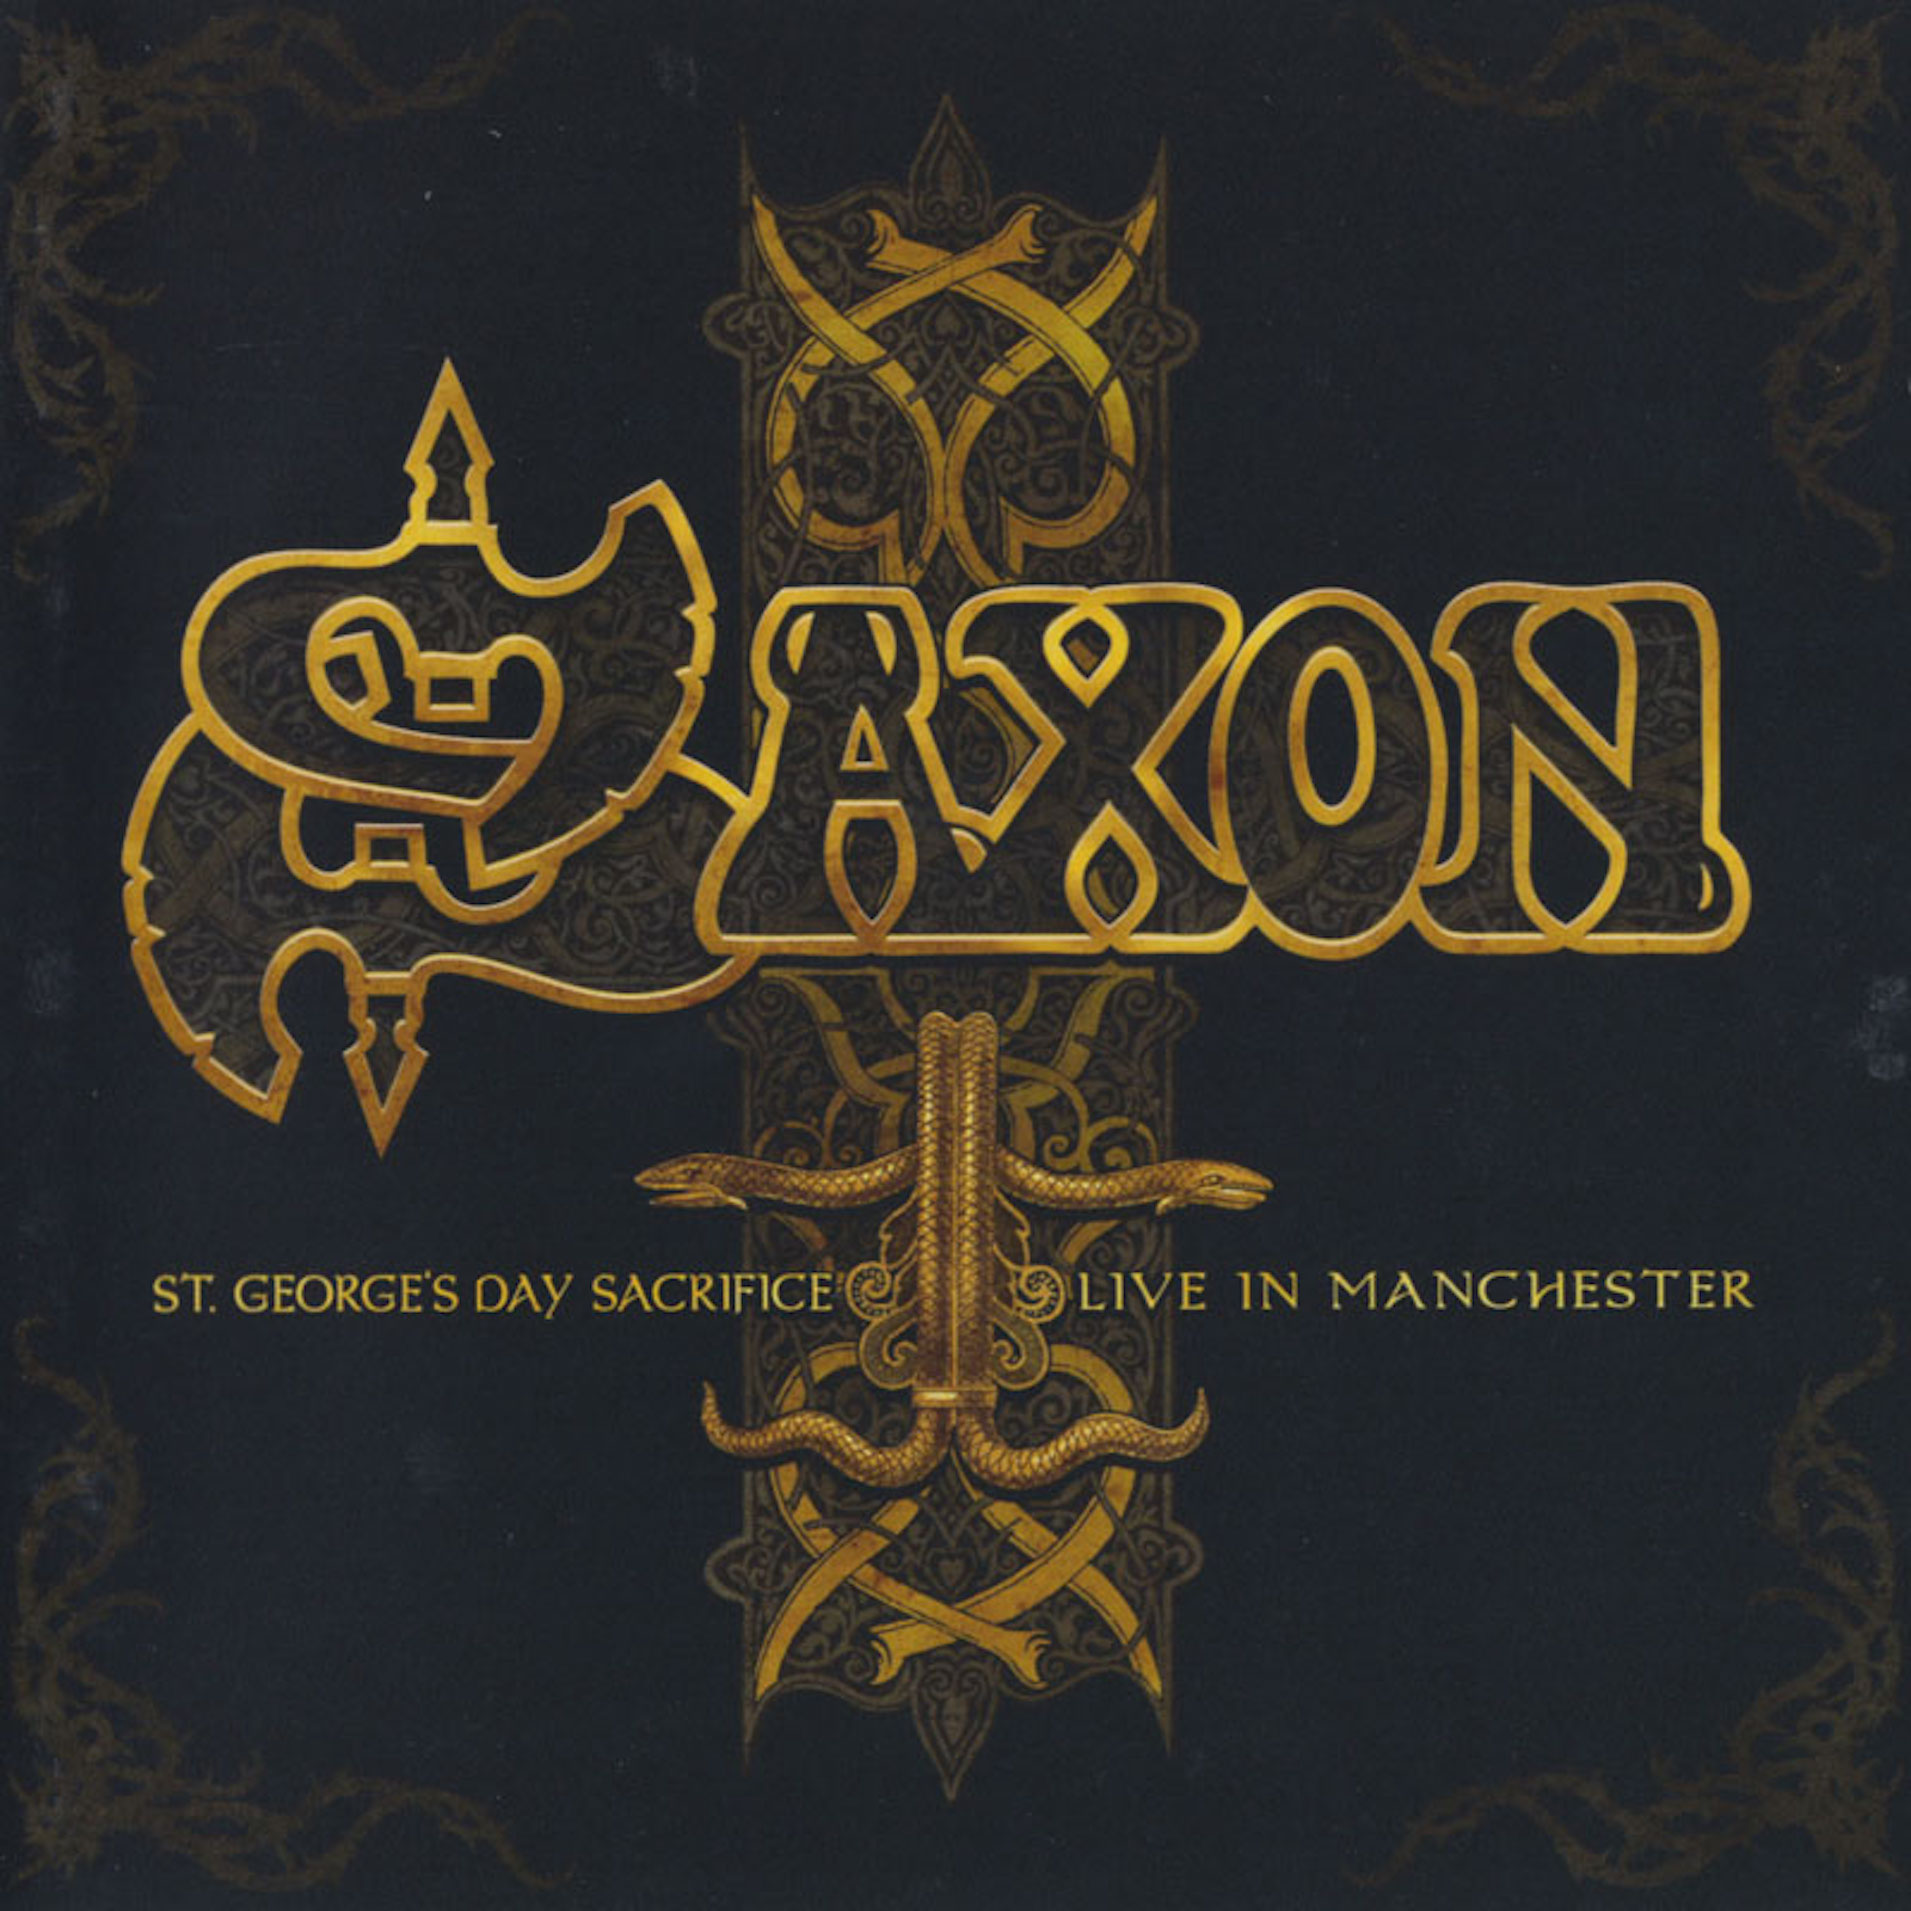 Covers Box Sk Saxon St George S Day Sacrifice Live In Manchester 2014 High Quality Dvd Blueray Movie